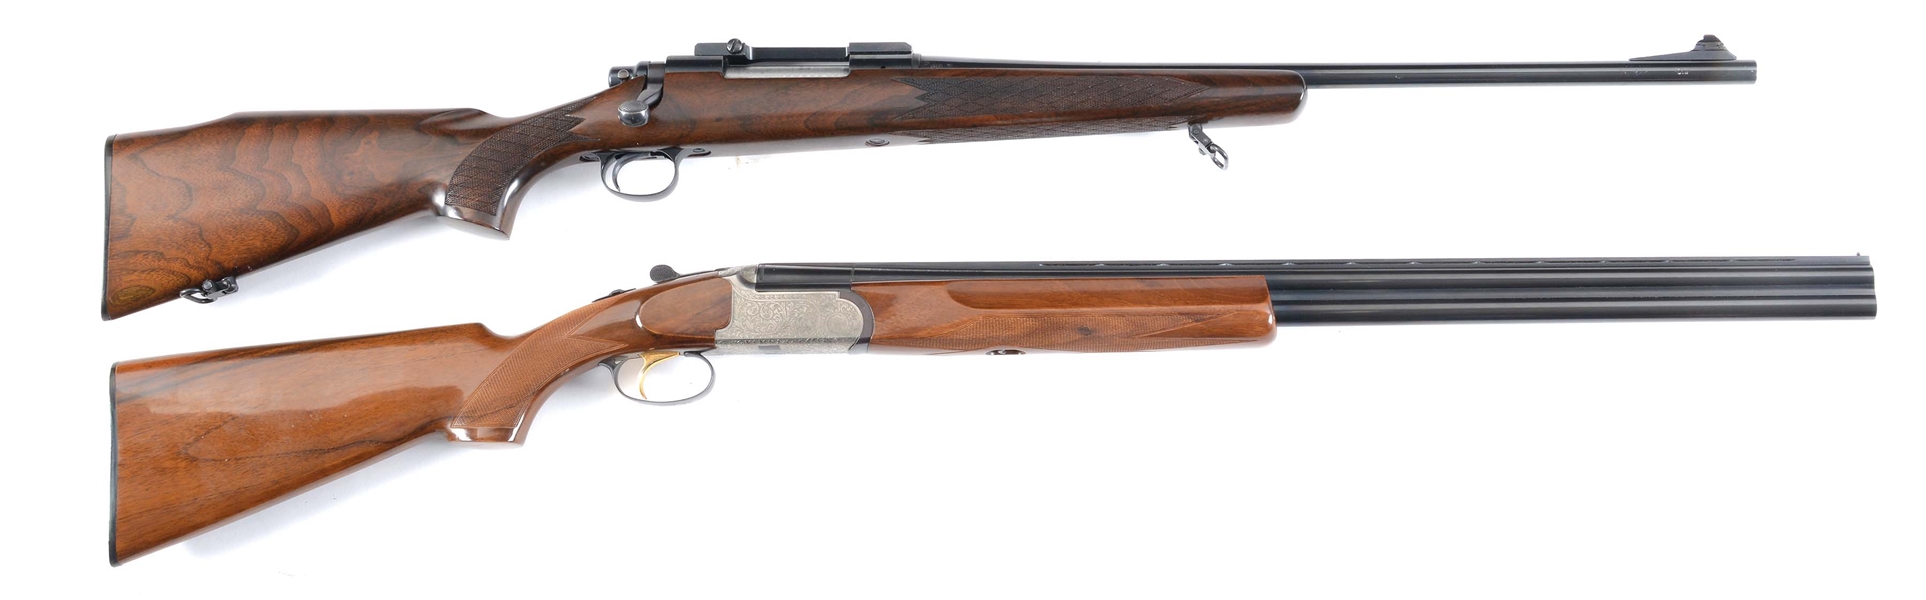 (M) LOT OF TWO: REMINGTON 700 .30-06 BOLT ACTION RIFLE AND CHARLES DALY SUPERIOR II 20 GAUGE SHOTGUN